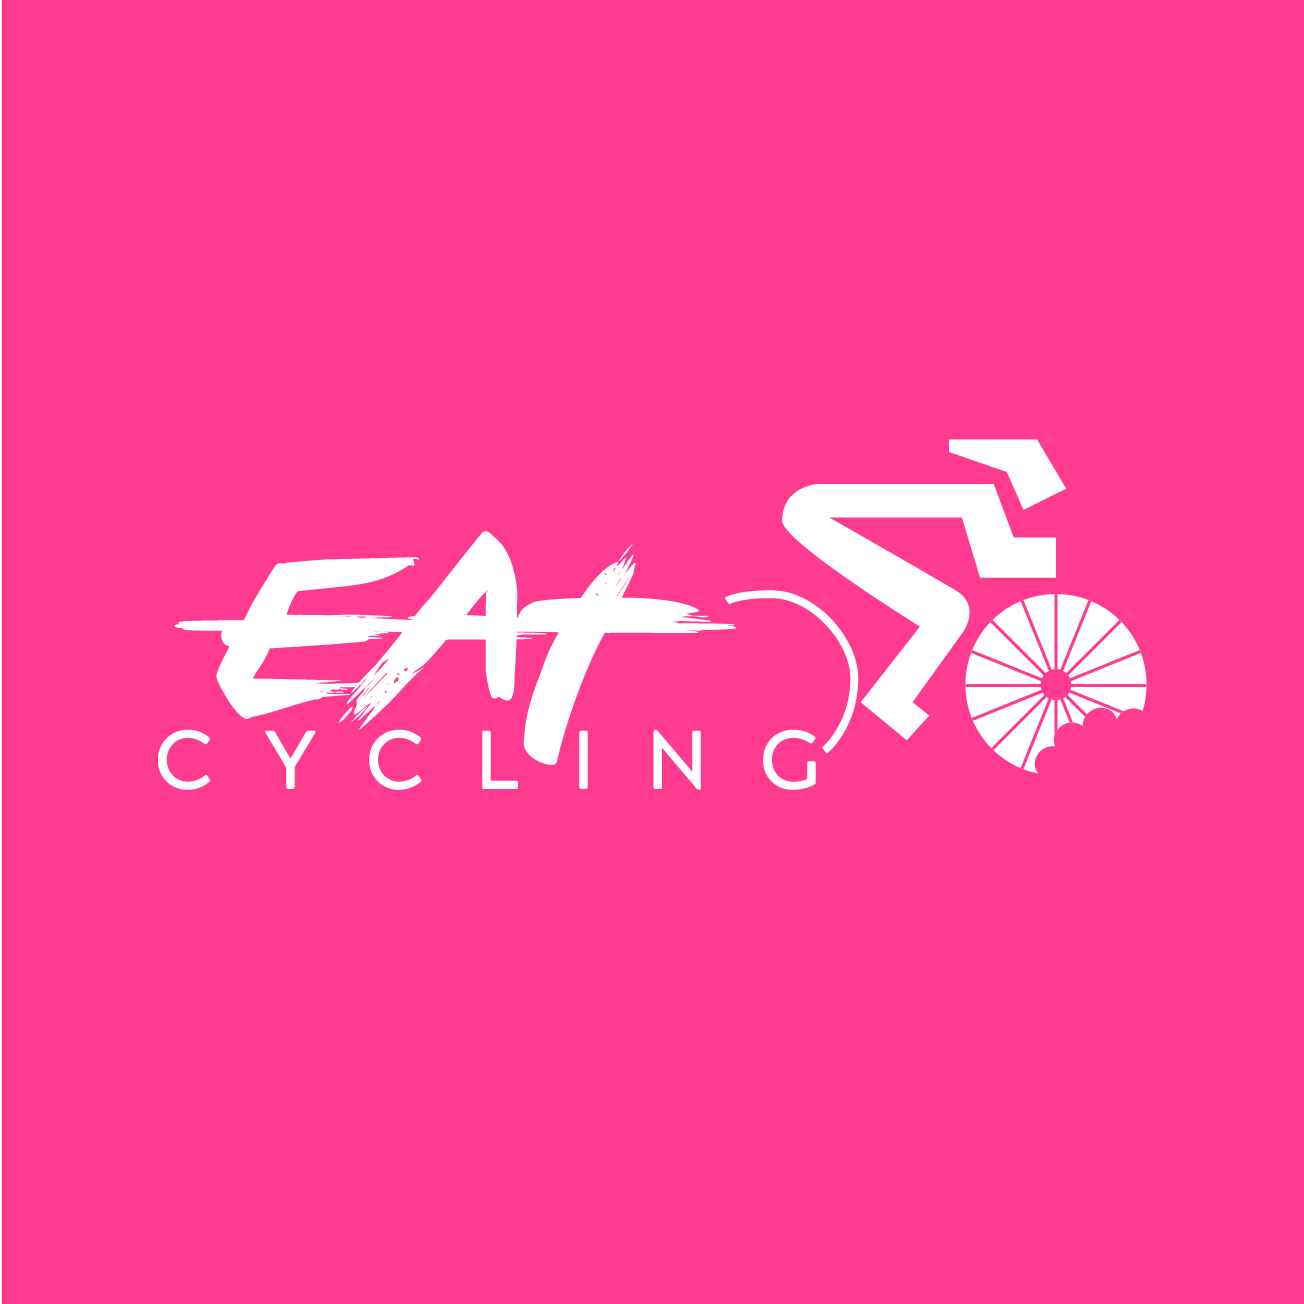 Club Image for EAT CYCLING